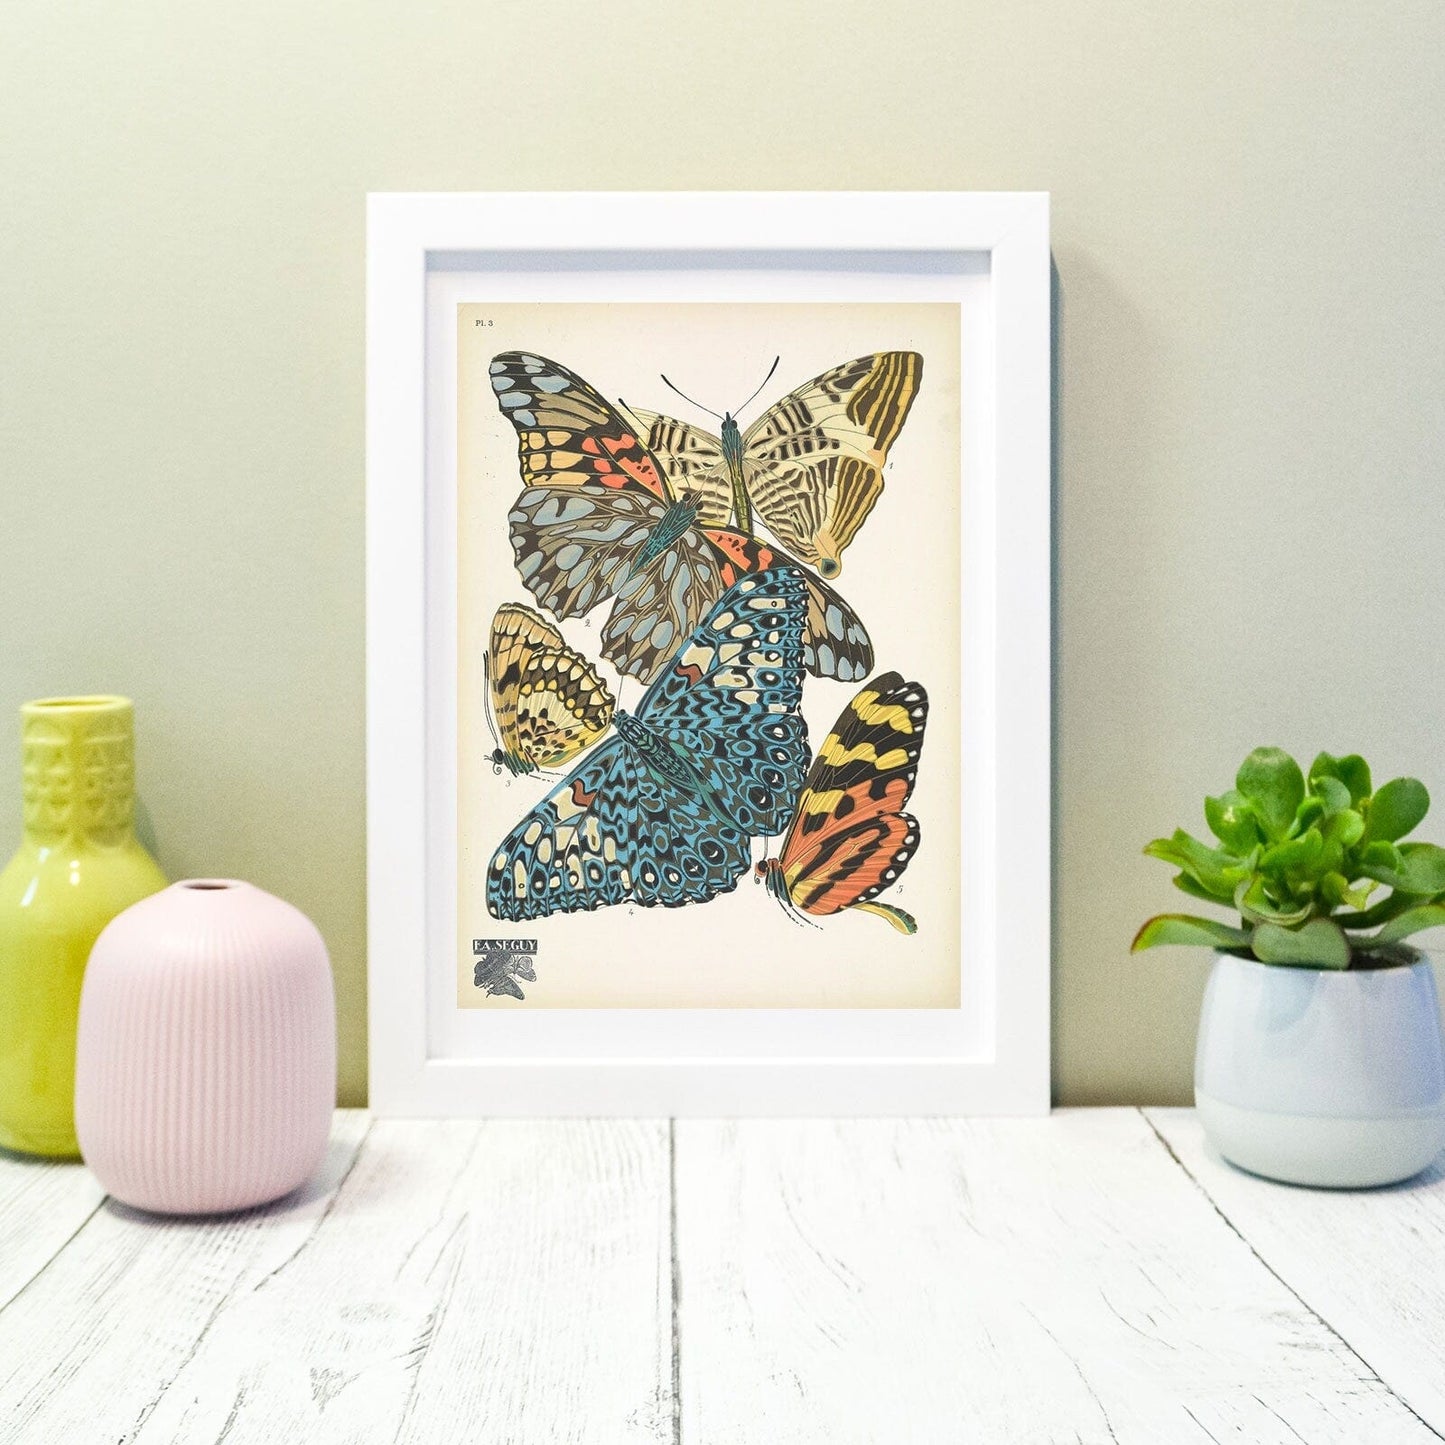 Framed Vintage Butterfly Print, Natural history butterflies Poster, butterfly Wall Art Print 14 of 16 A5 A4, A3, A2 Vintage Animal Prints